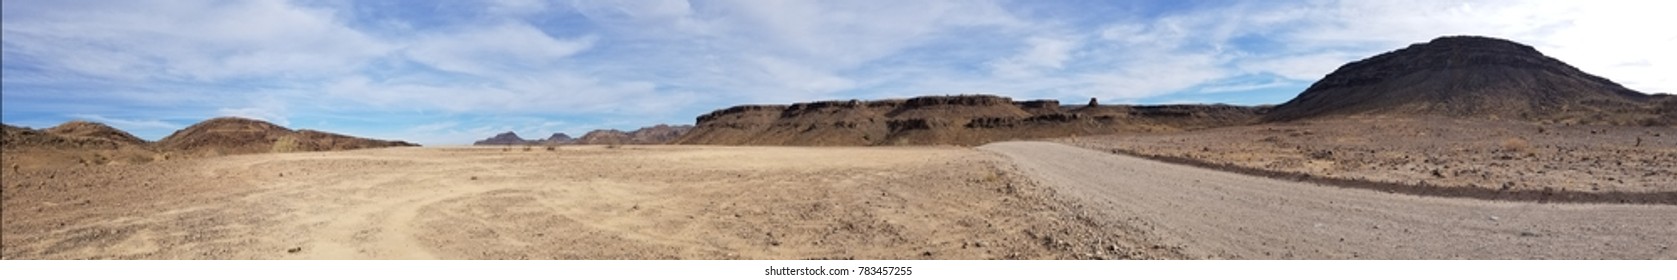 Panoramic view of Arizona desert with dirt road on side